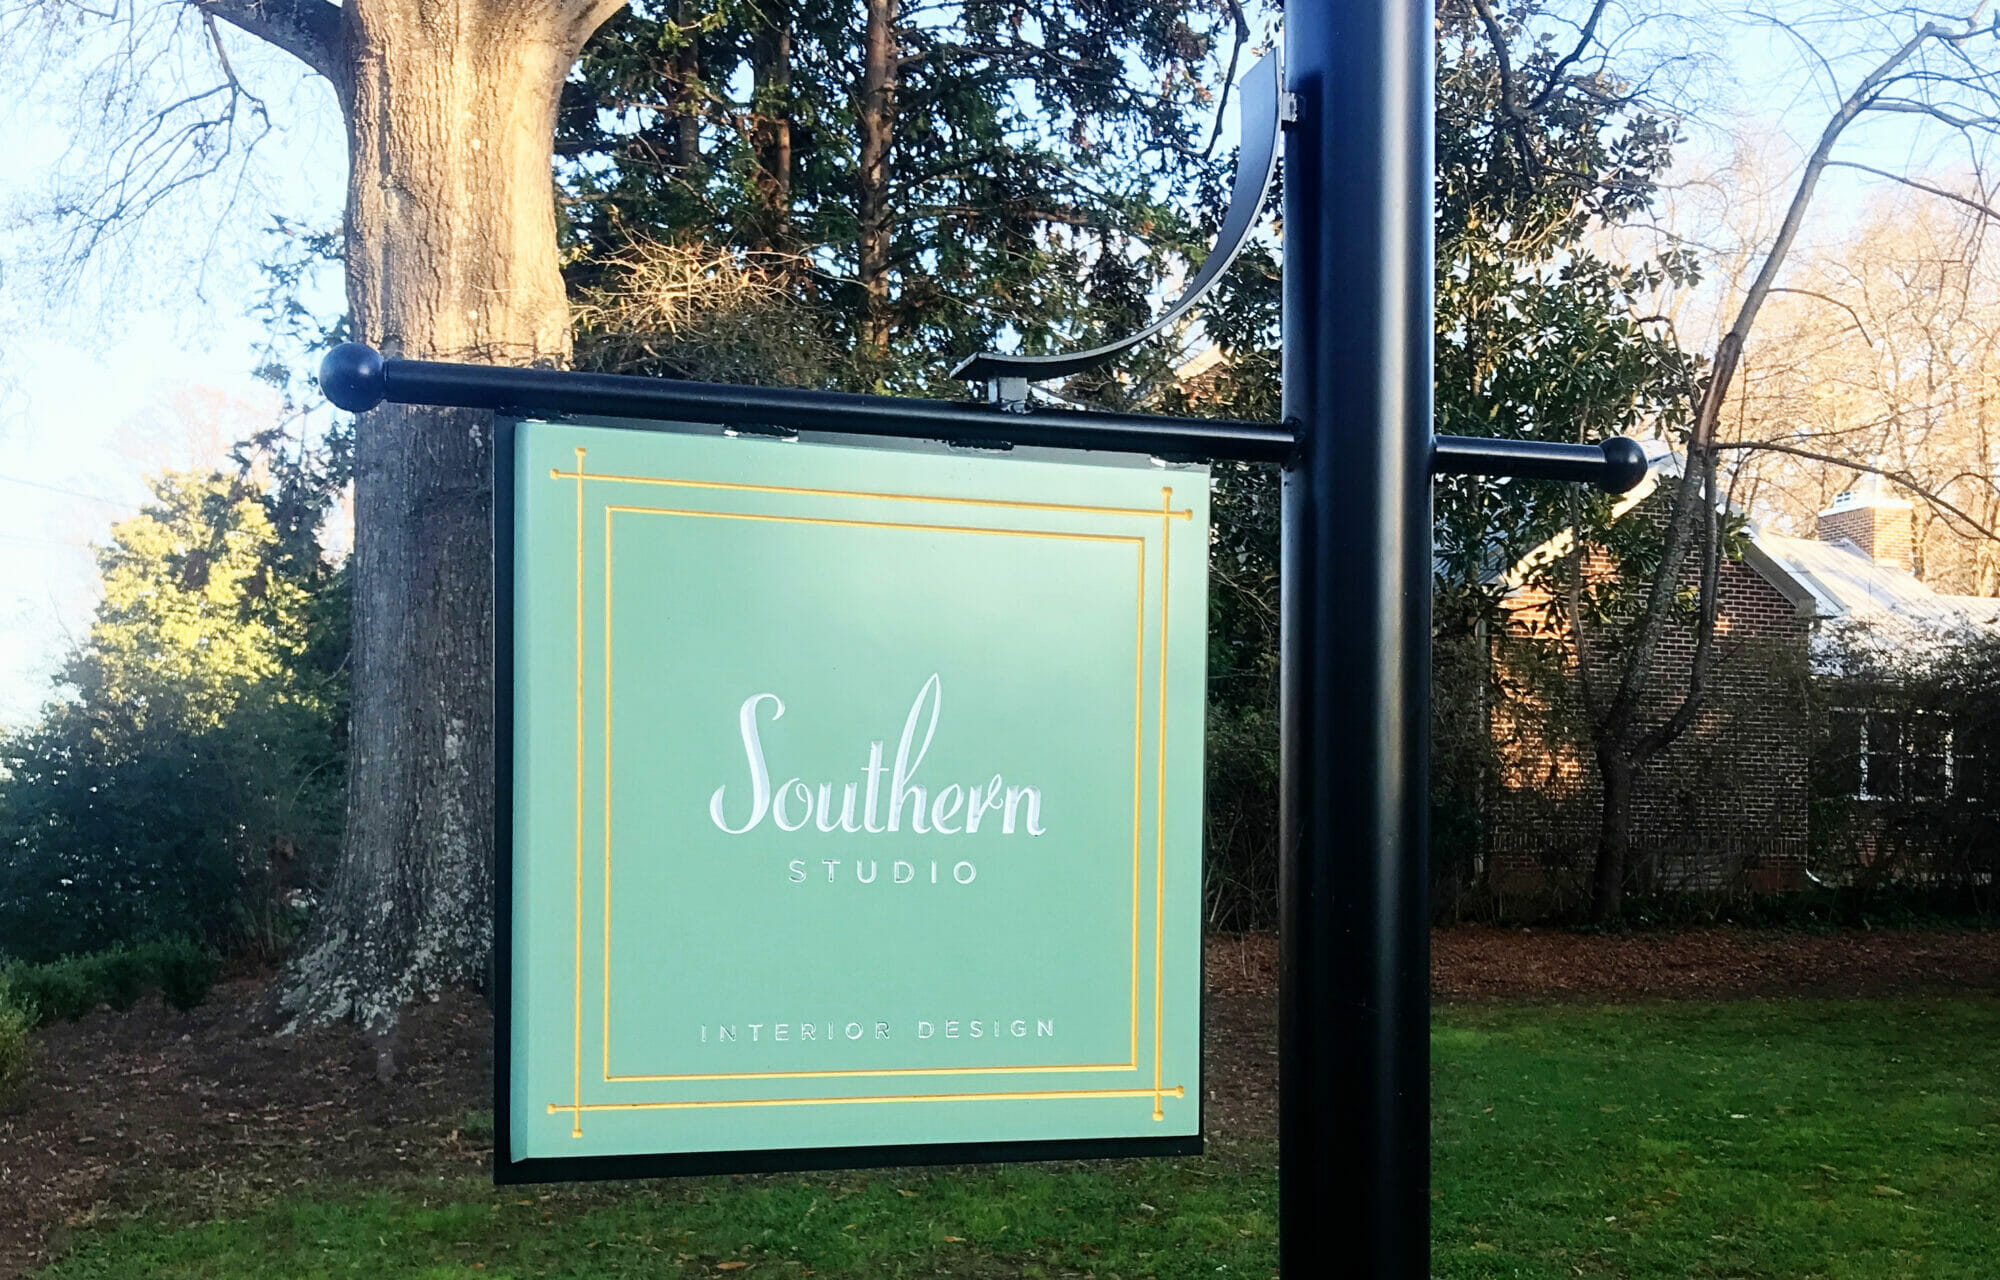 The Southern Studio